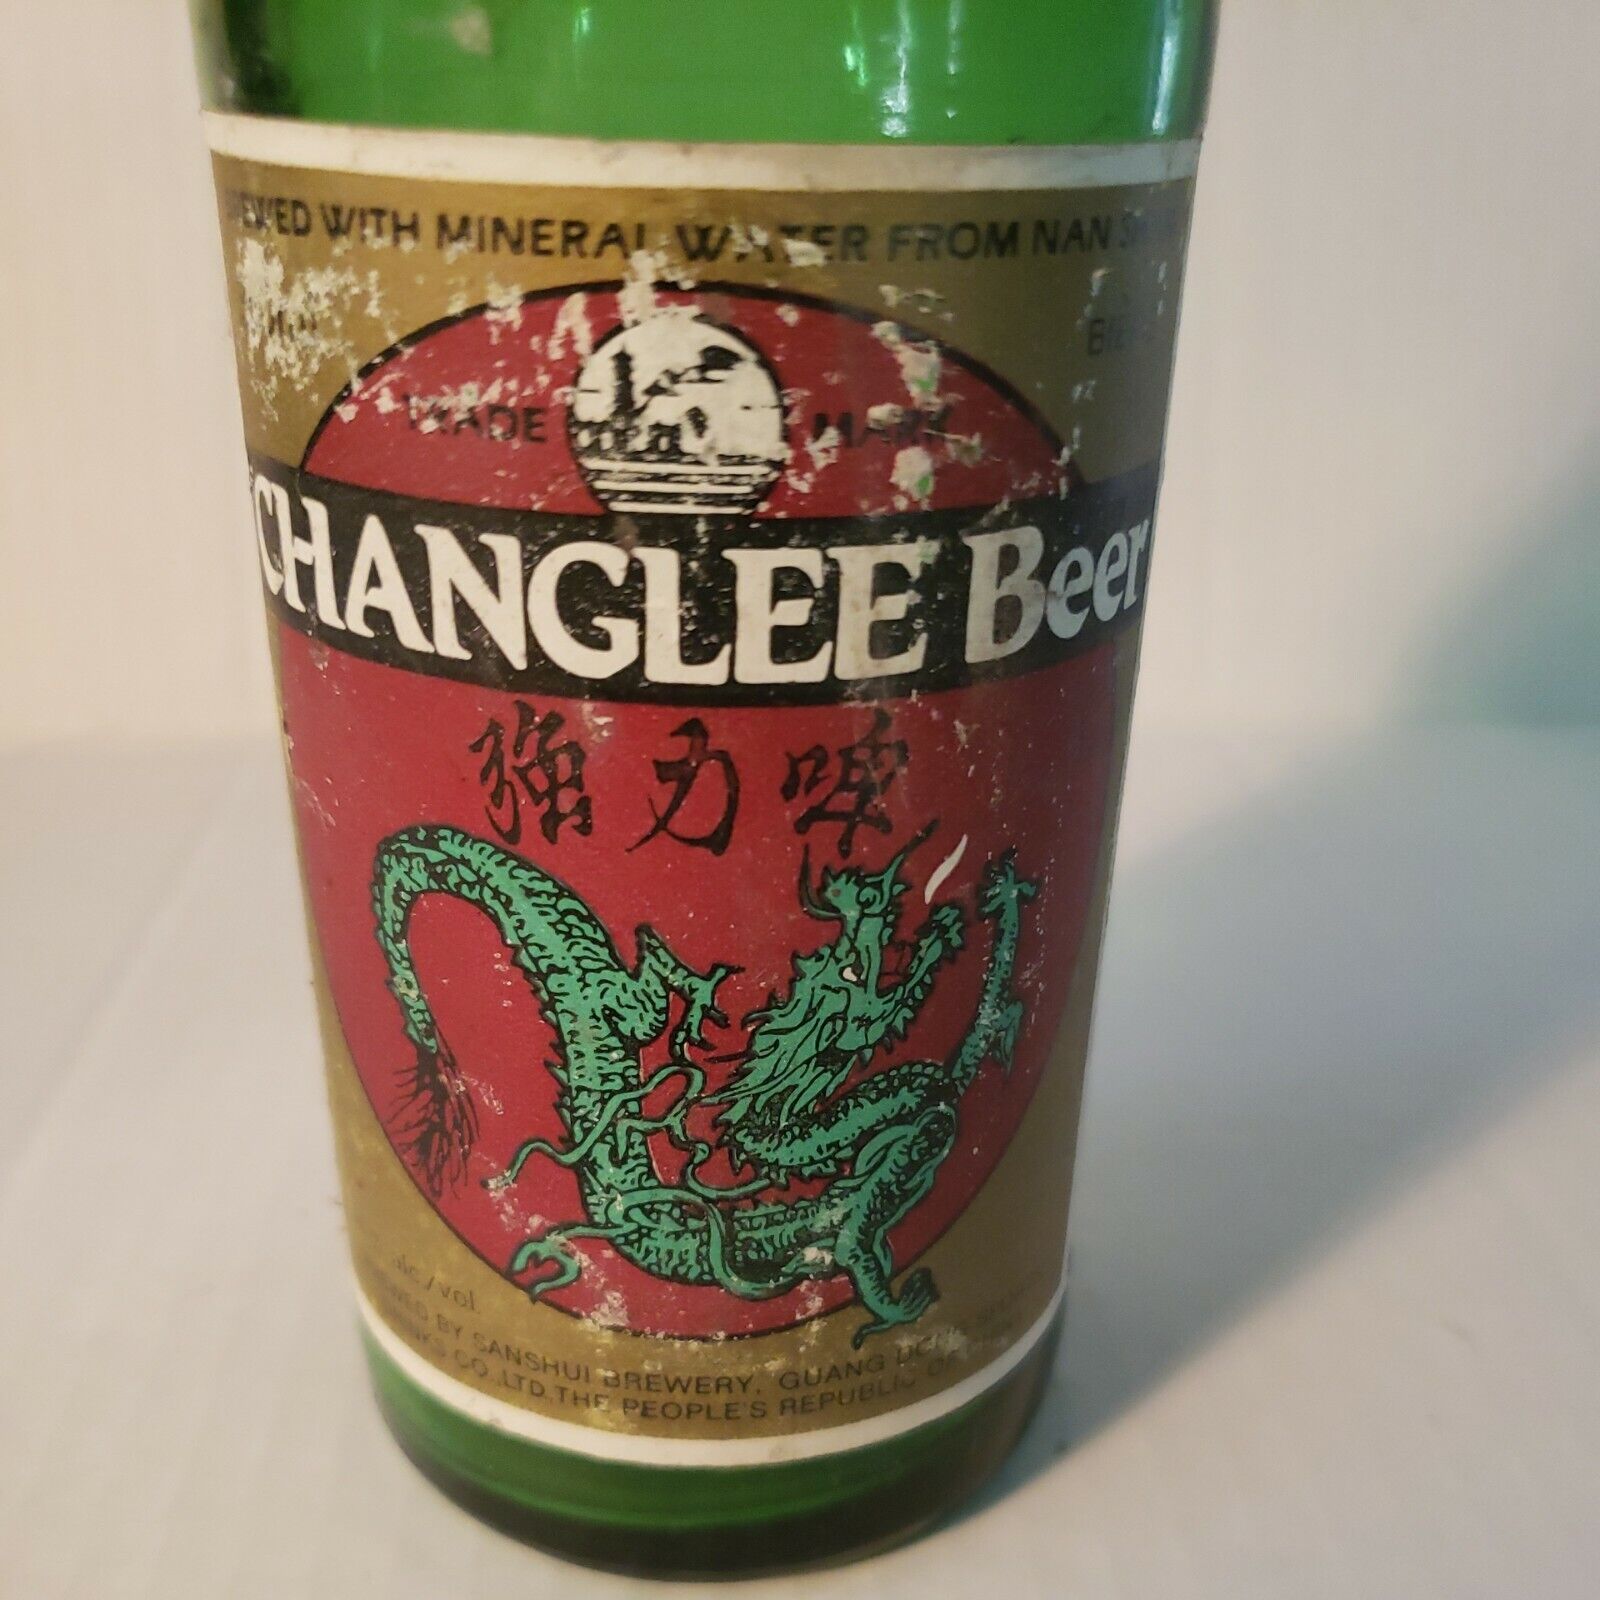 CHANGLEE BEER bottle (empty)  brewed in china 